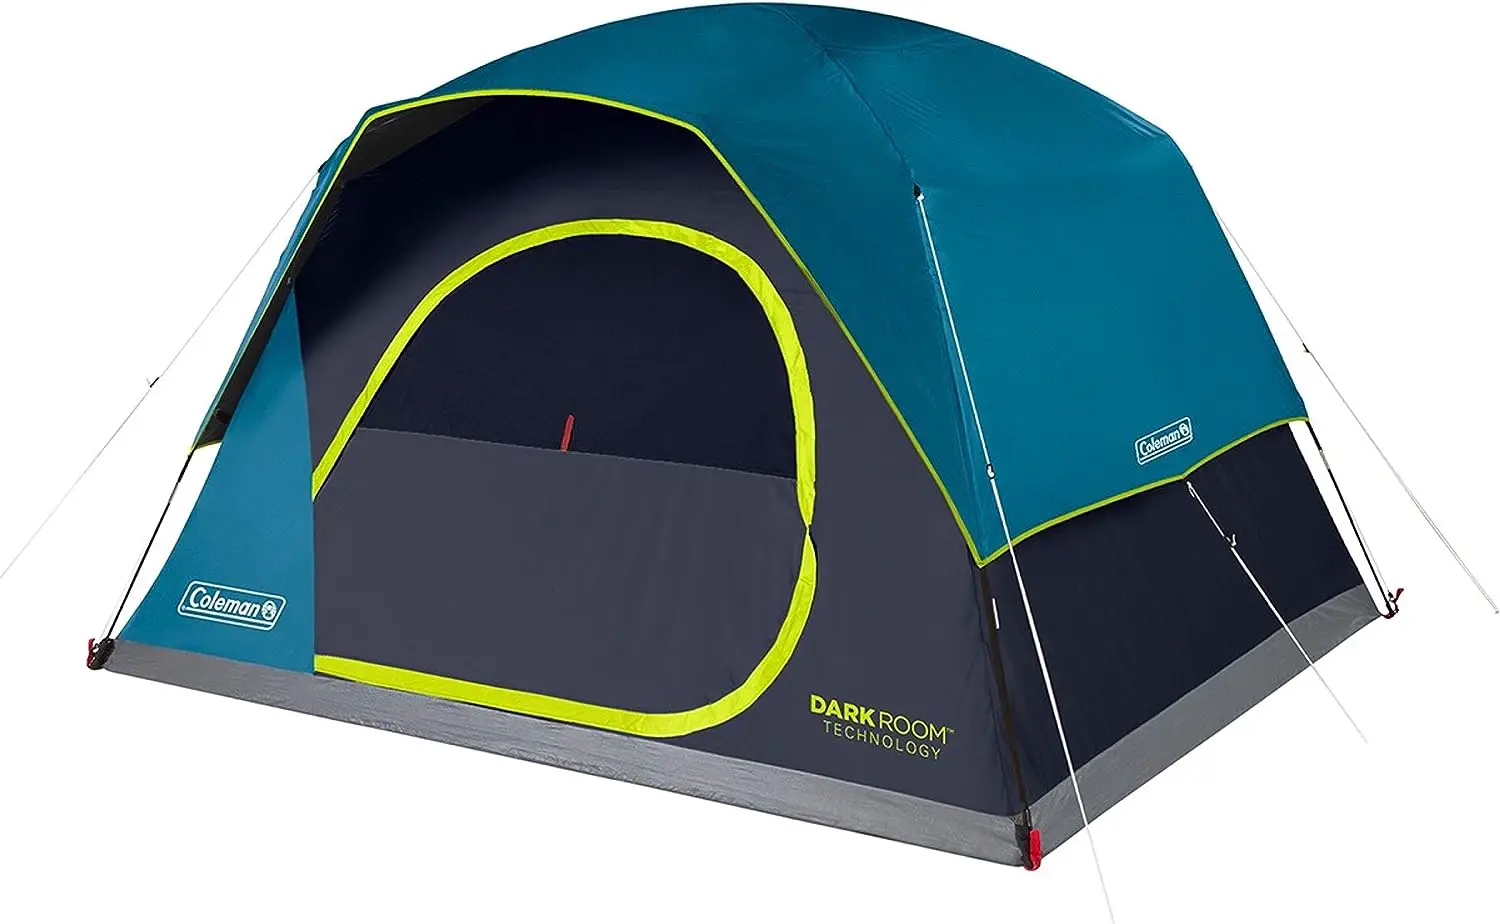 Dark Room Technology Tent Review